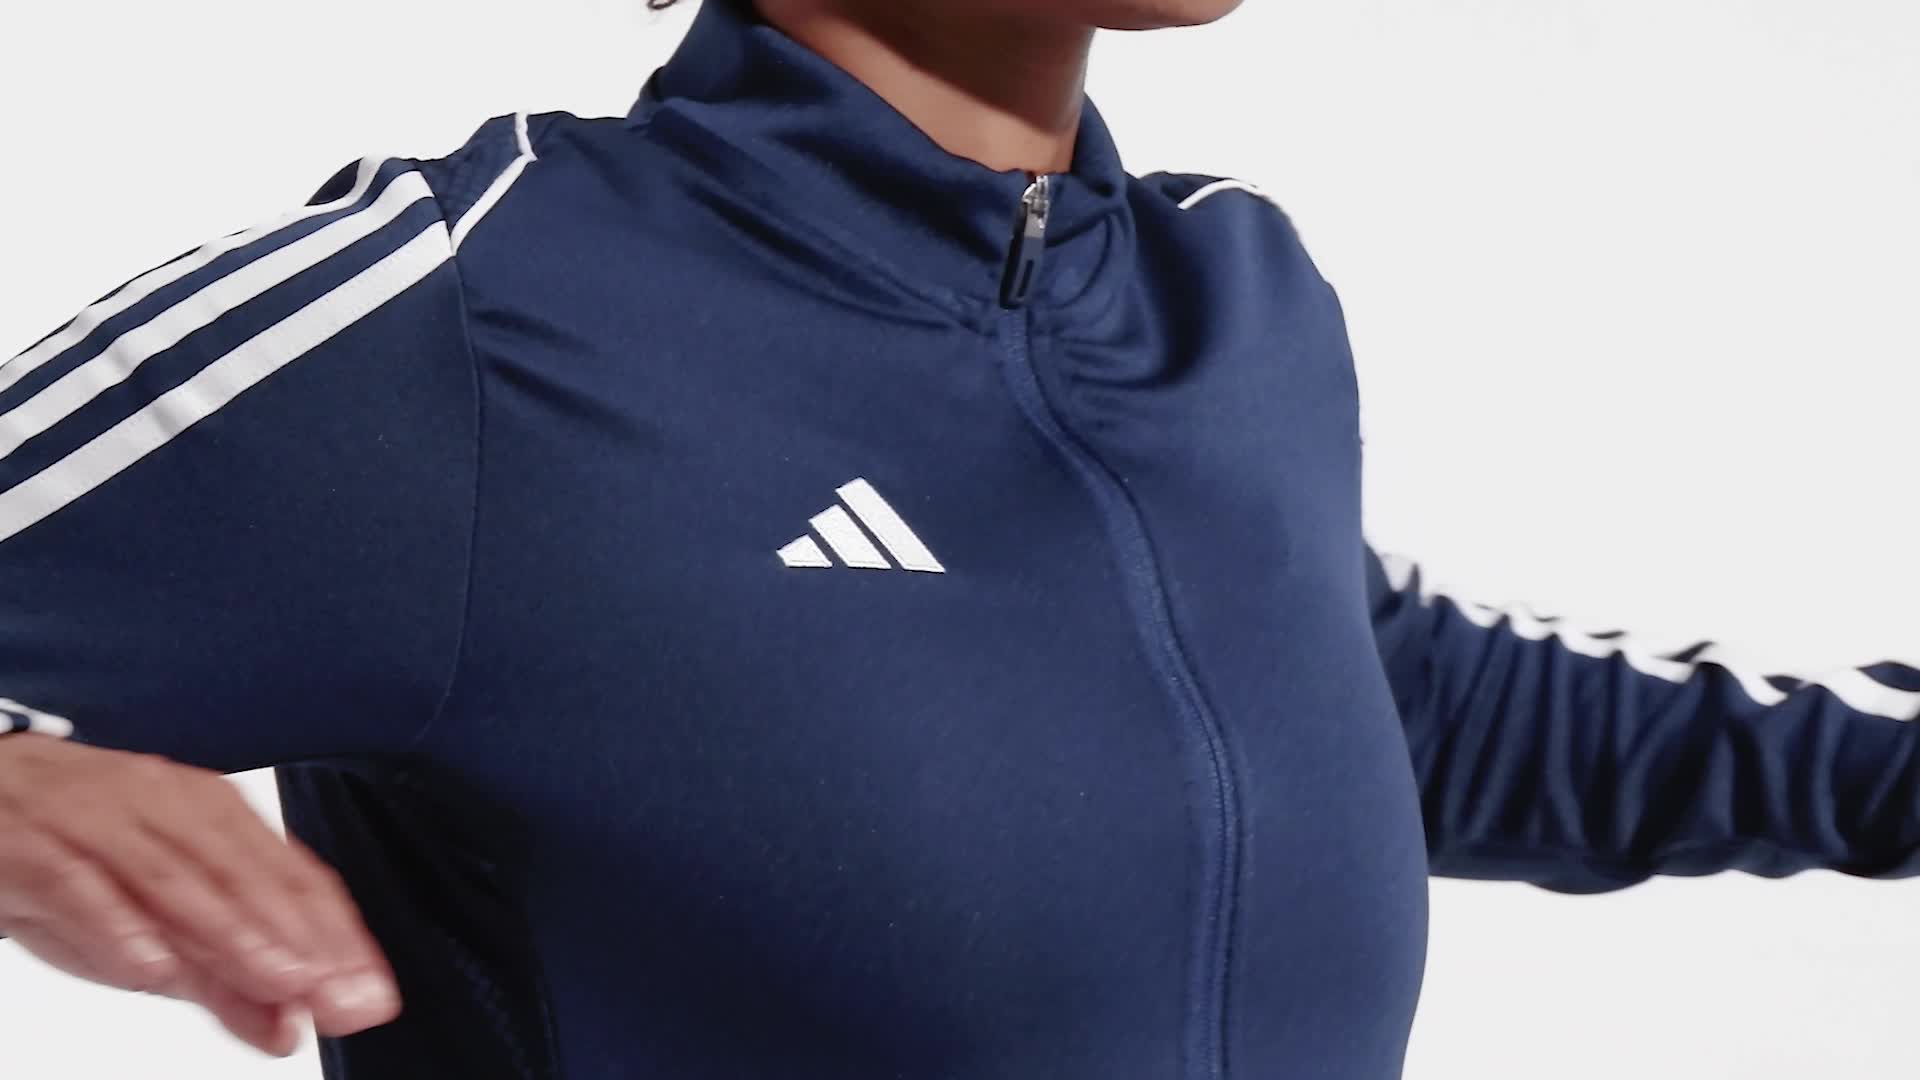 GO Sport Mauritius - WOMEN'S ESSENTIALS 3-STRIPES TRACK SUIT🔥 Pulling  together a look that's classically sporty doesn't get any easier than this.  This adidas track suit has a regular fit that feels